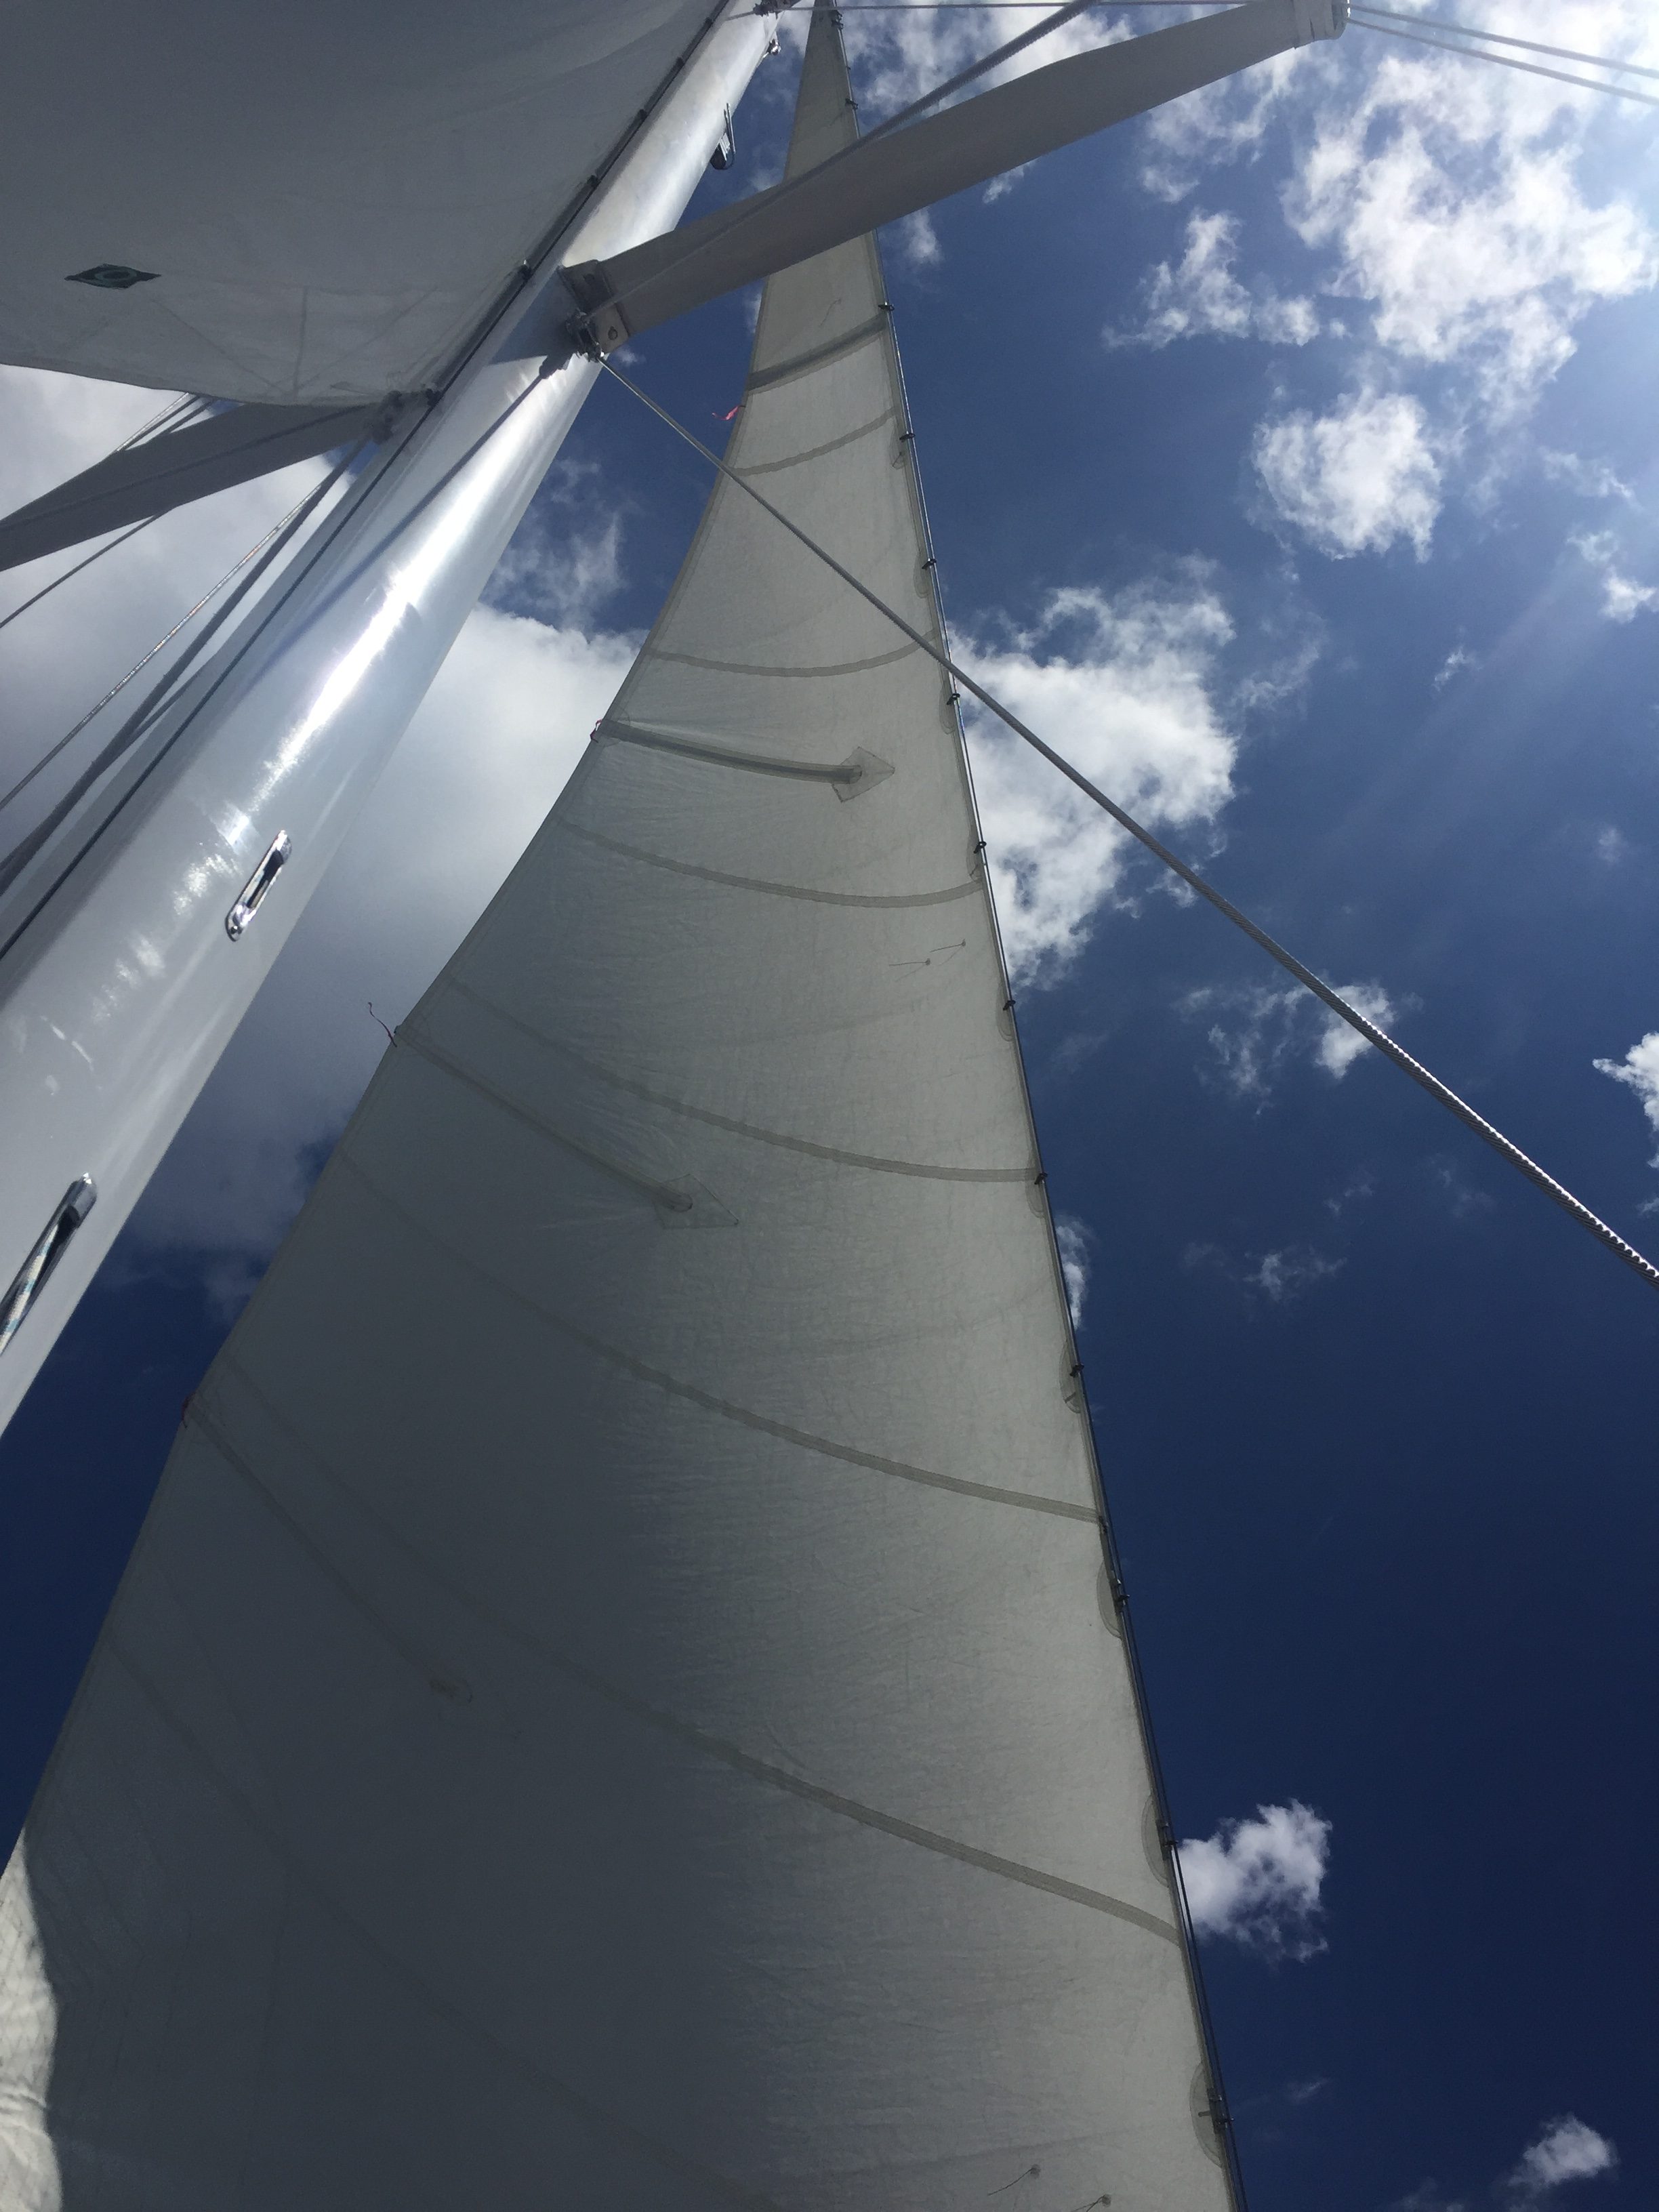 Full white sail and mast in looking up into blue sky with white clouds